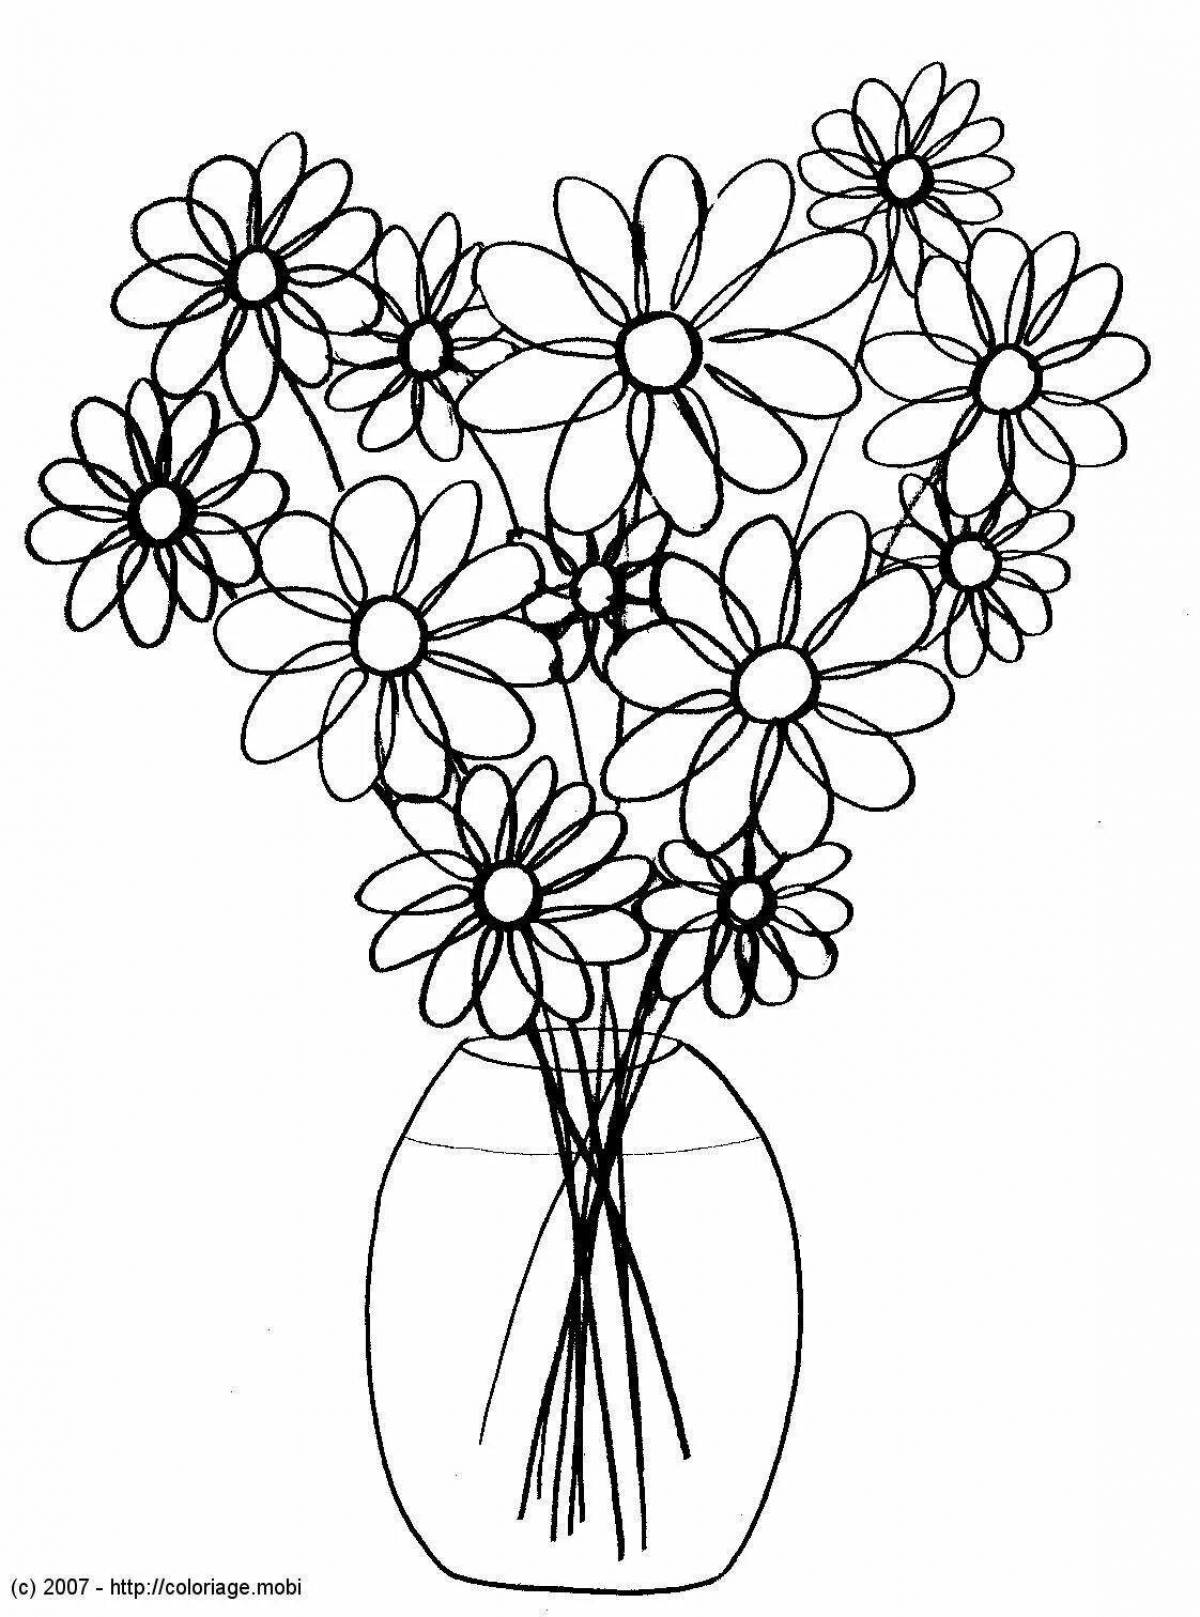 Coloring book jubilant bouquet of daisies